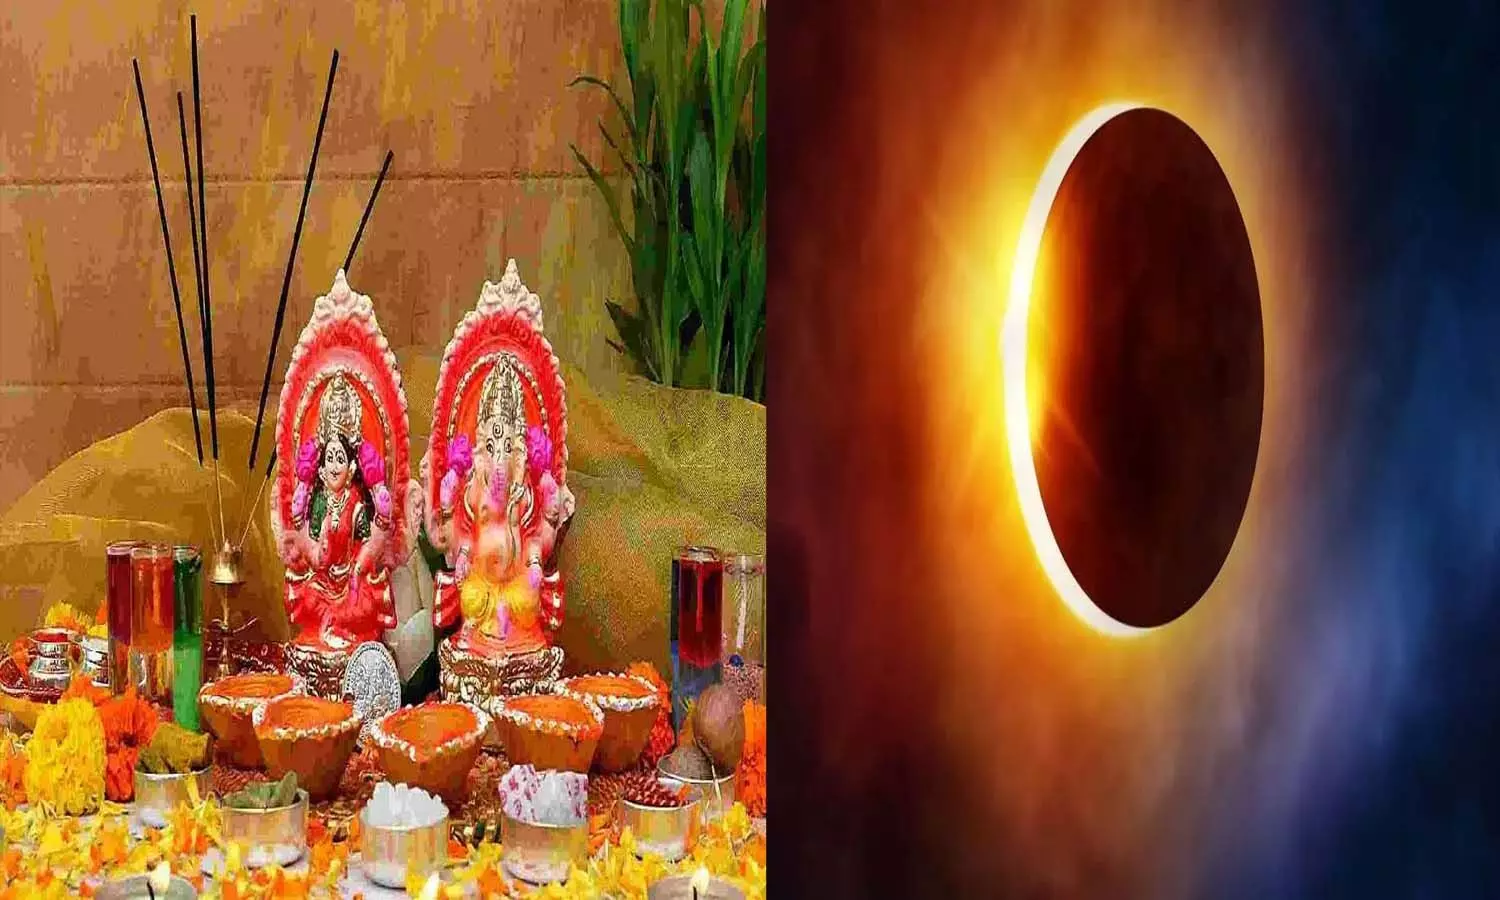 Know the complete method of immersion after Diwali, what to do during solar eclipse